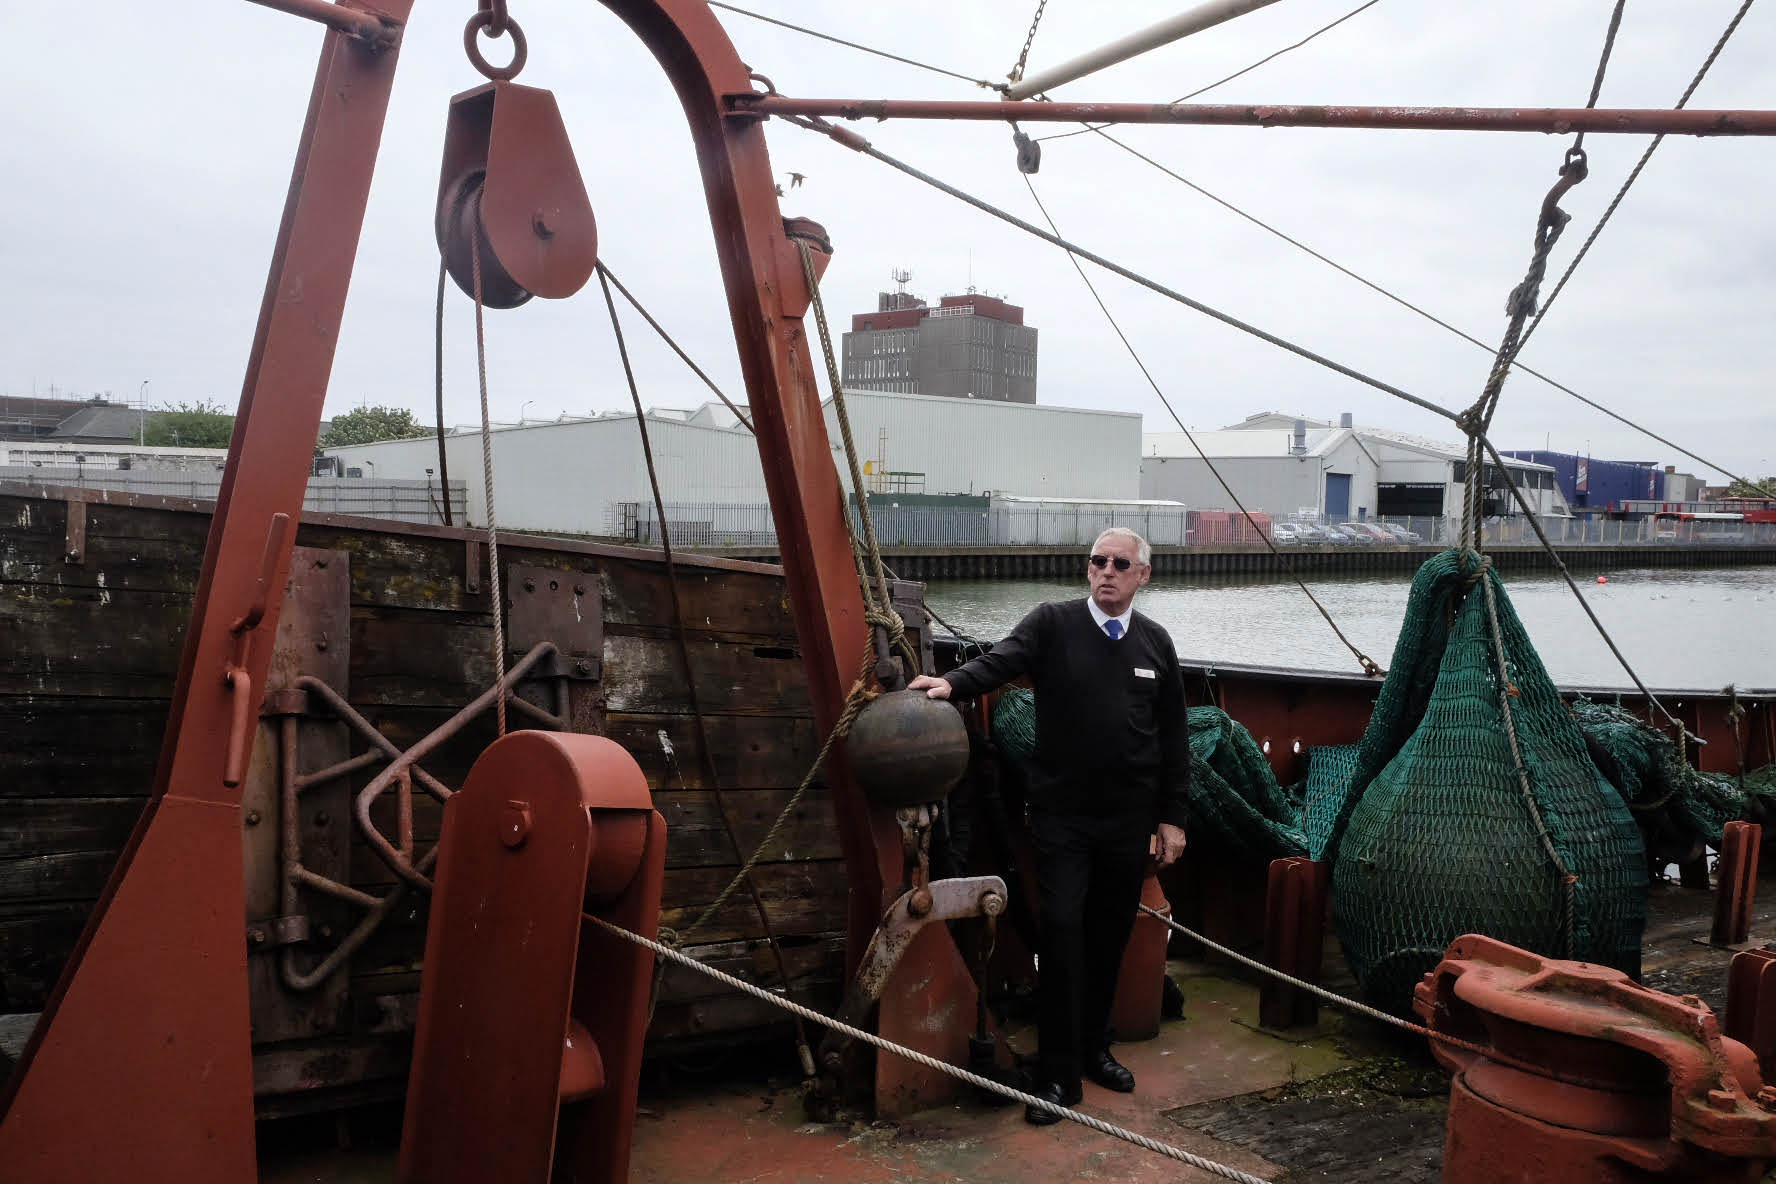 John Vincent conducts a tour on the Ross Tiger, now a part of the Grimsby Heritage Centre in the town of Grimsby, U.K., on May 28, 2015. (Photograph by Tara John)